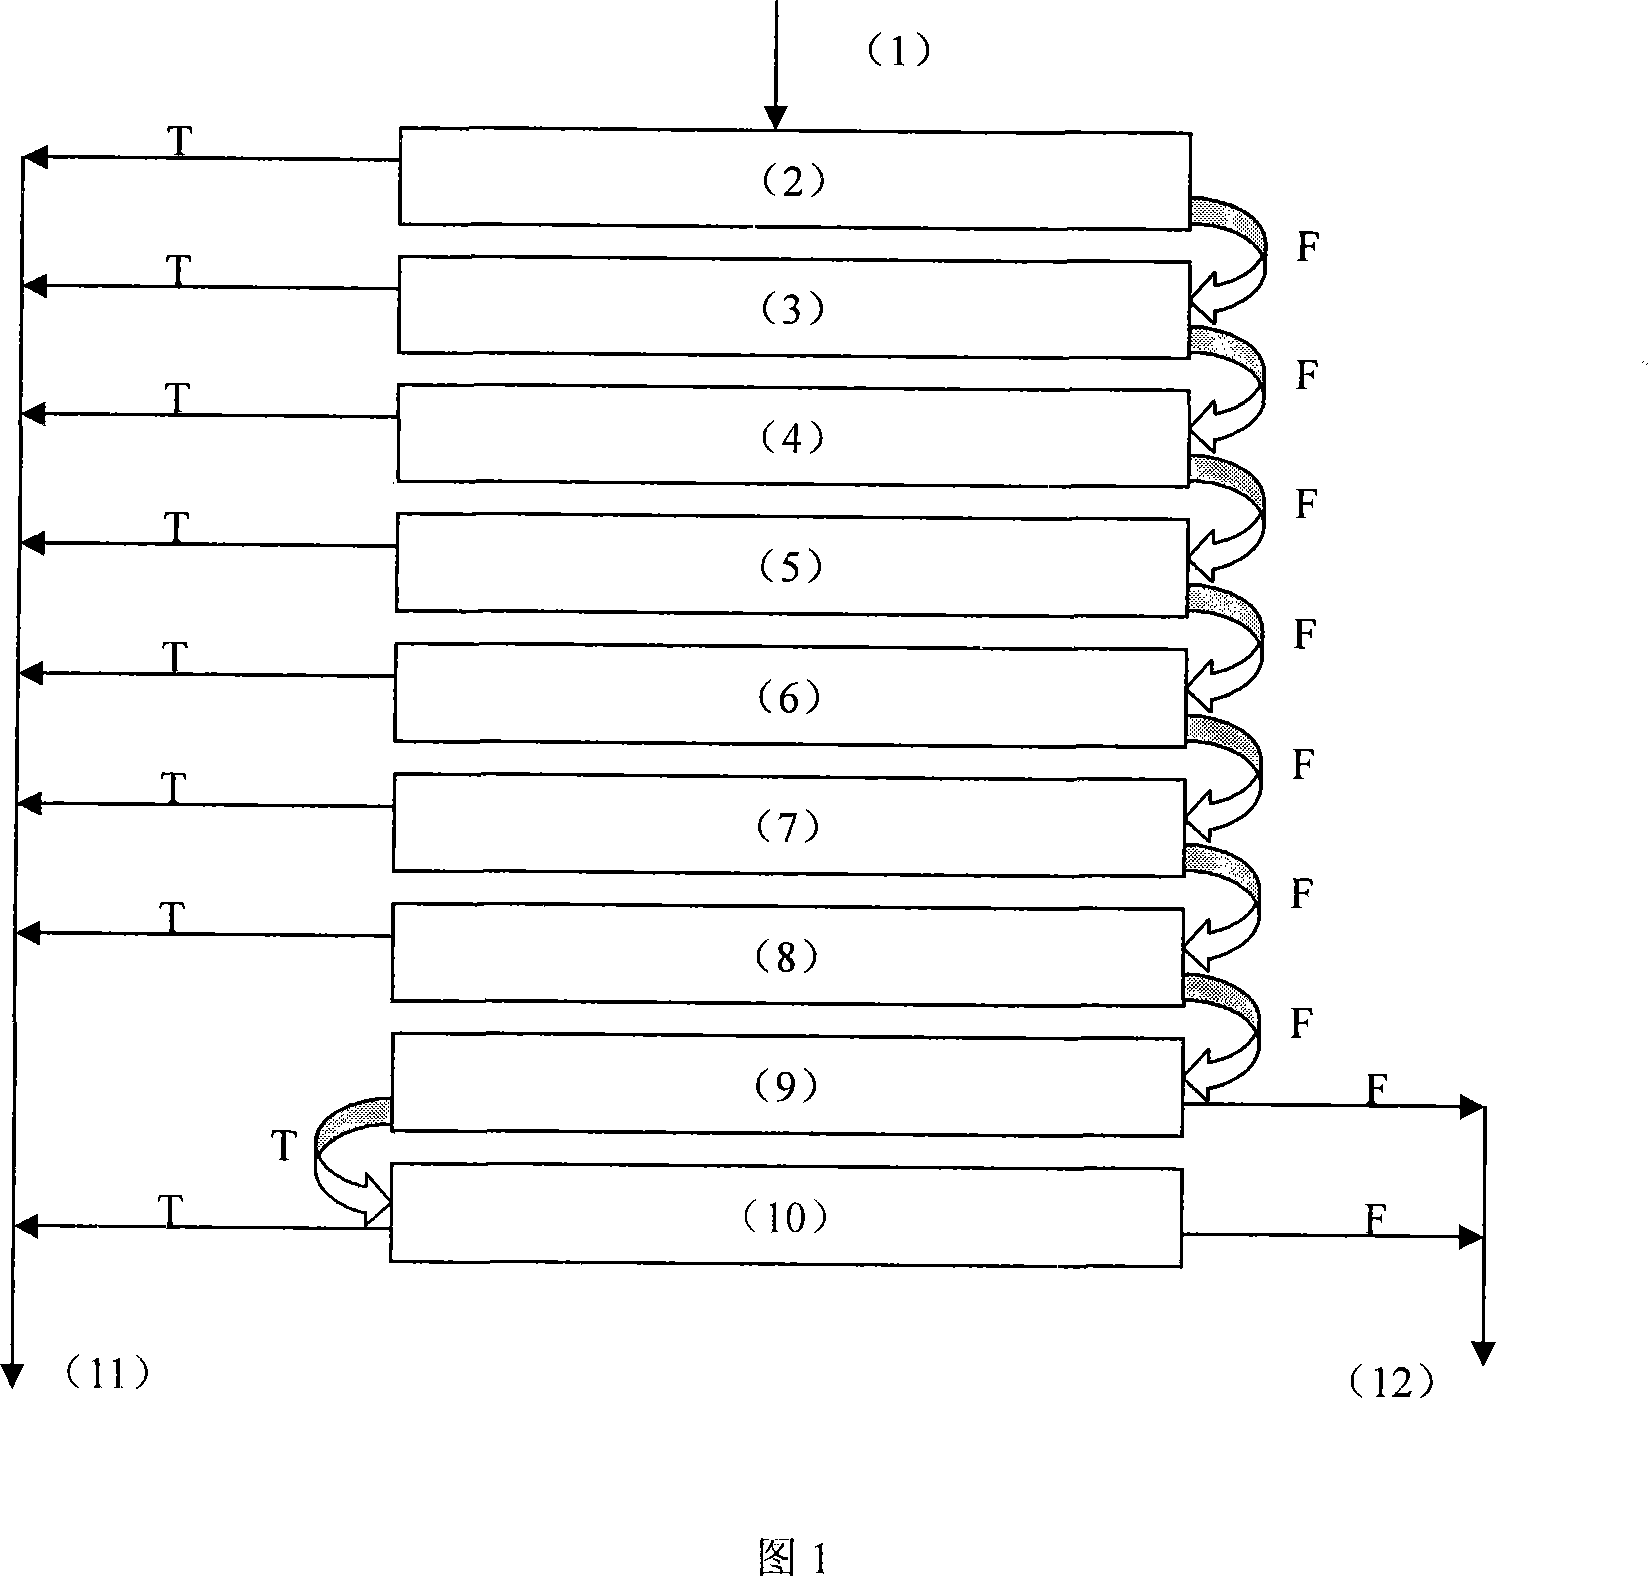 Method for automatically extracting website owner administrative apanage information from web page